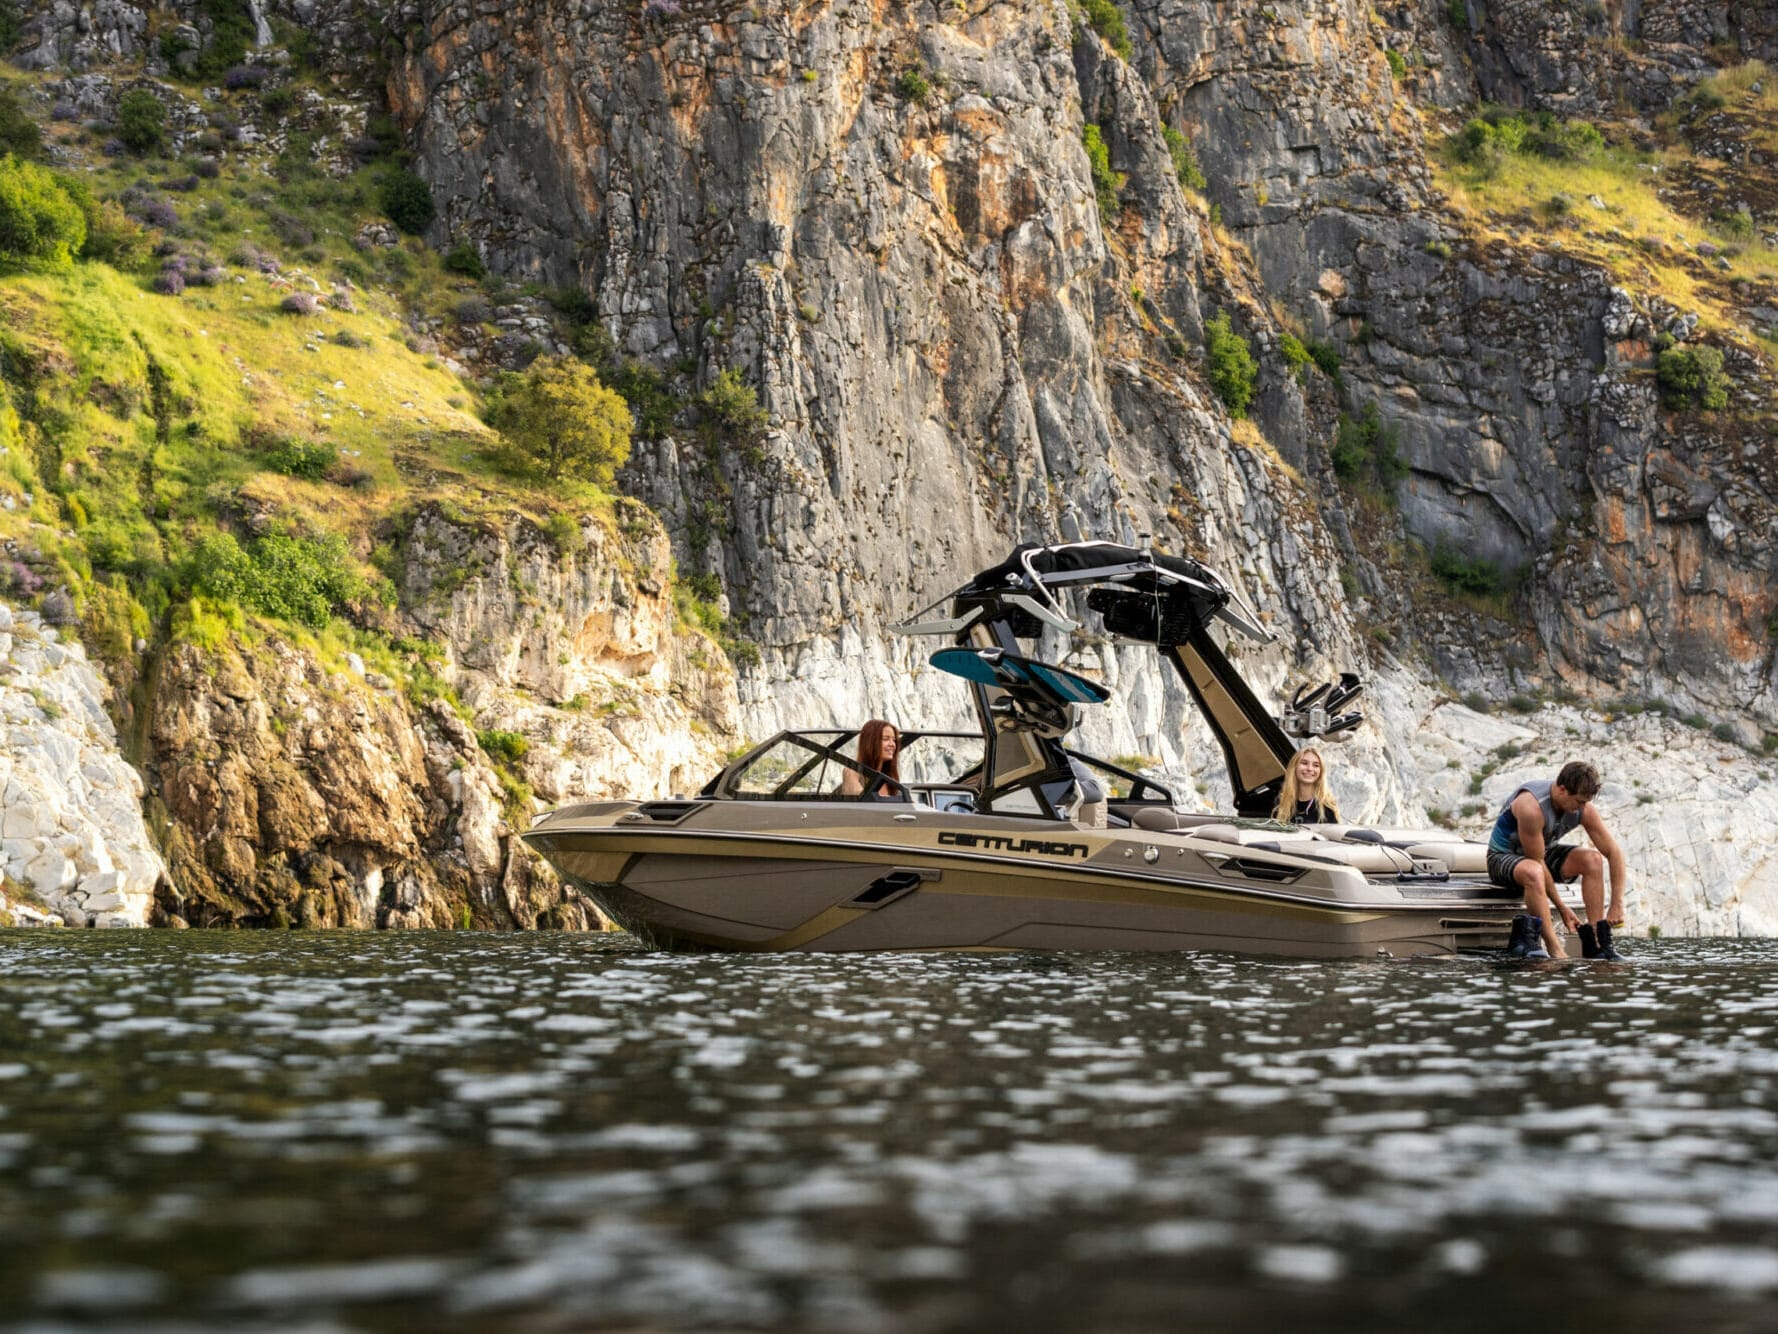 A man is standing on a wakeboat in the water next to a cliff.